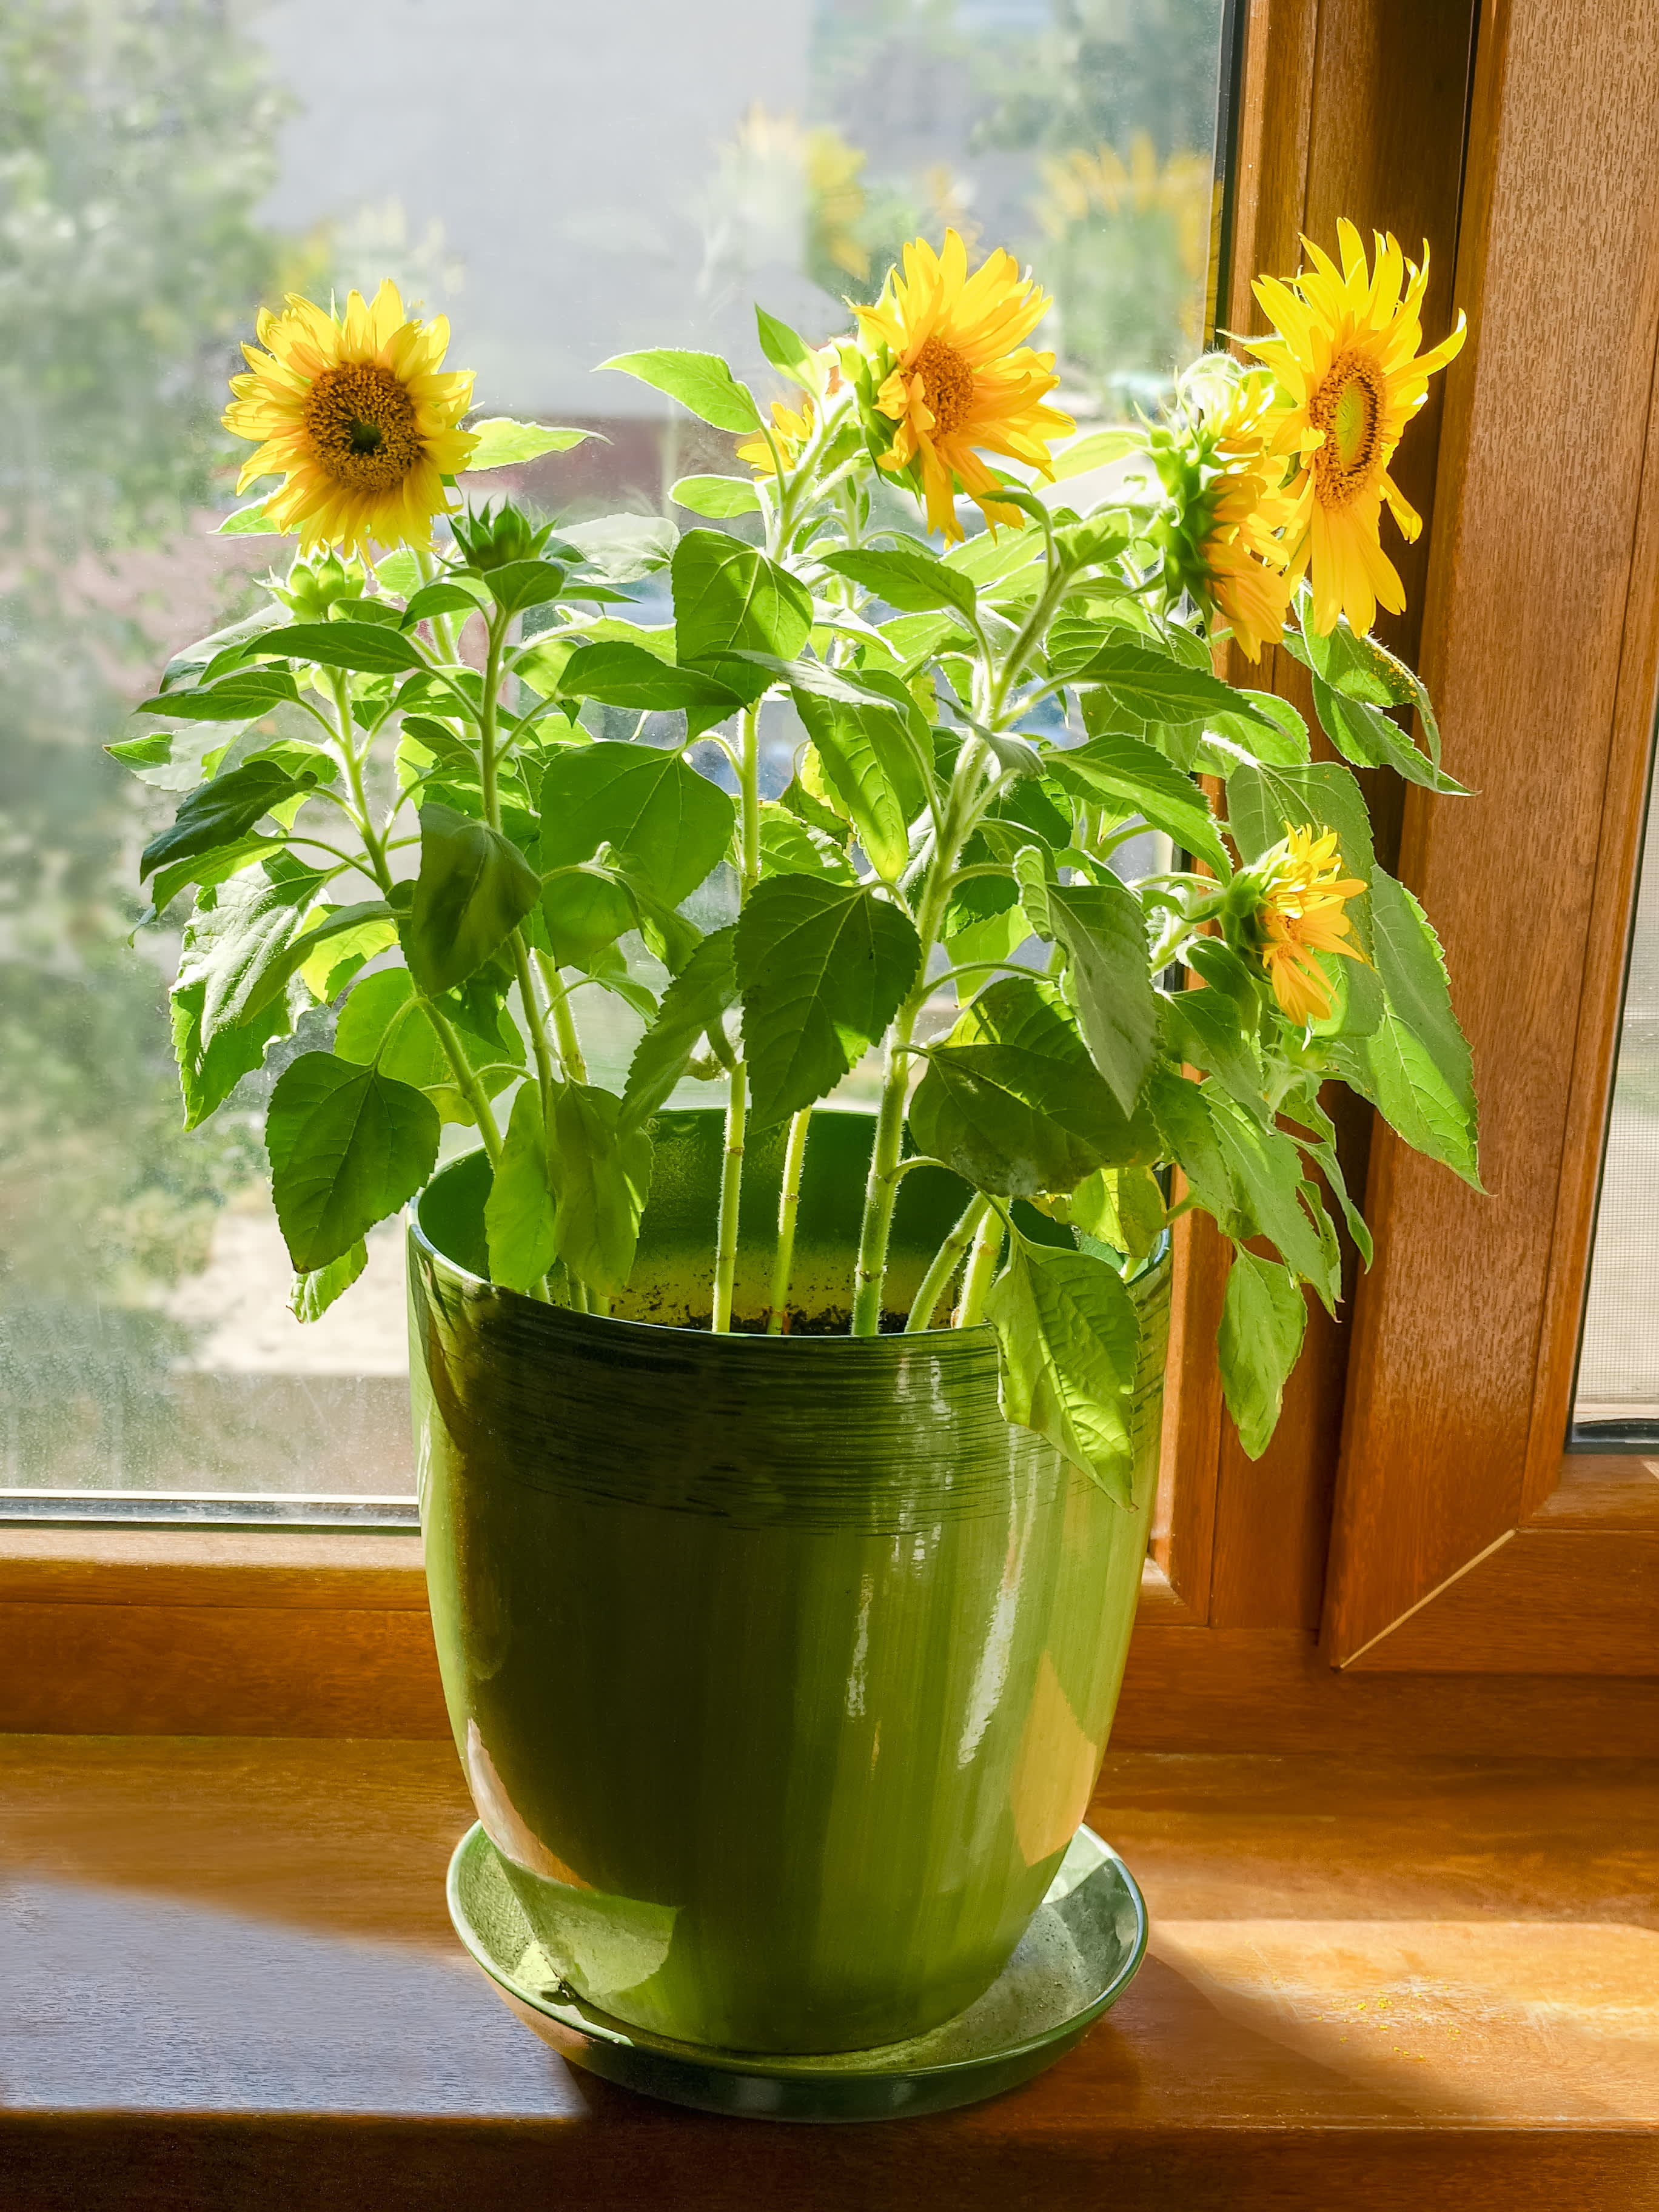 https://cdn.apartmenttherapy.info/image/upload/v1693408928/at/home-projects/2023-08/growing-sunflowers-in-pots/potted-sunflower-windowsill-shutterstock_1006987624.jpg